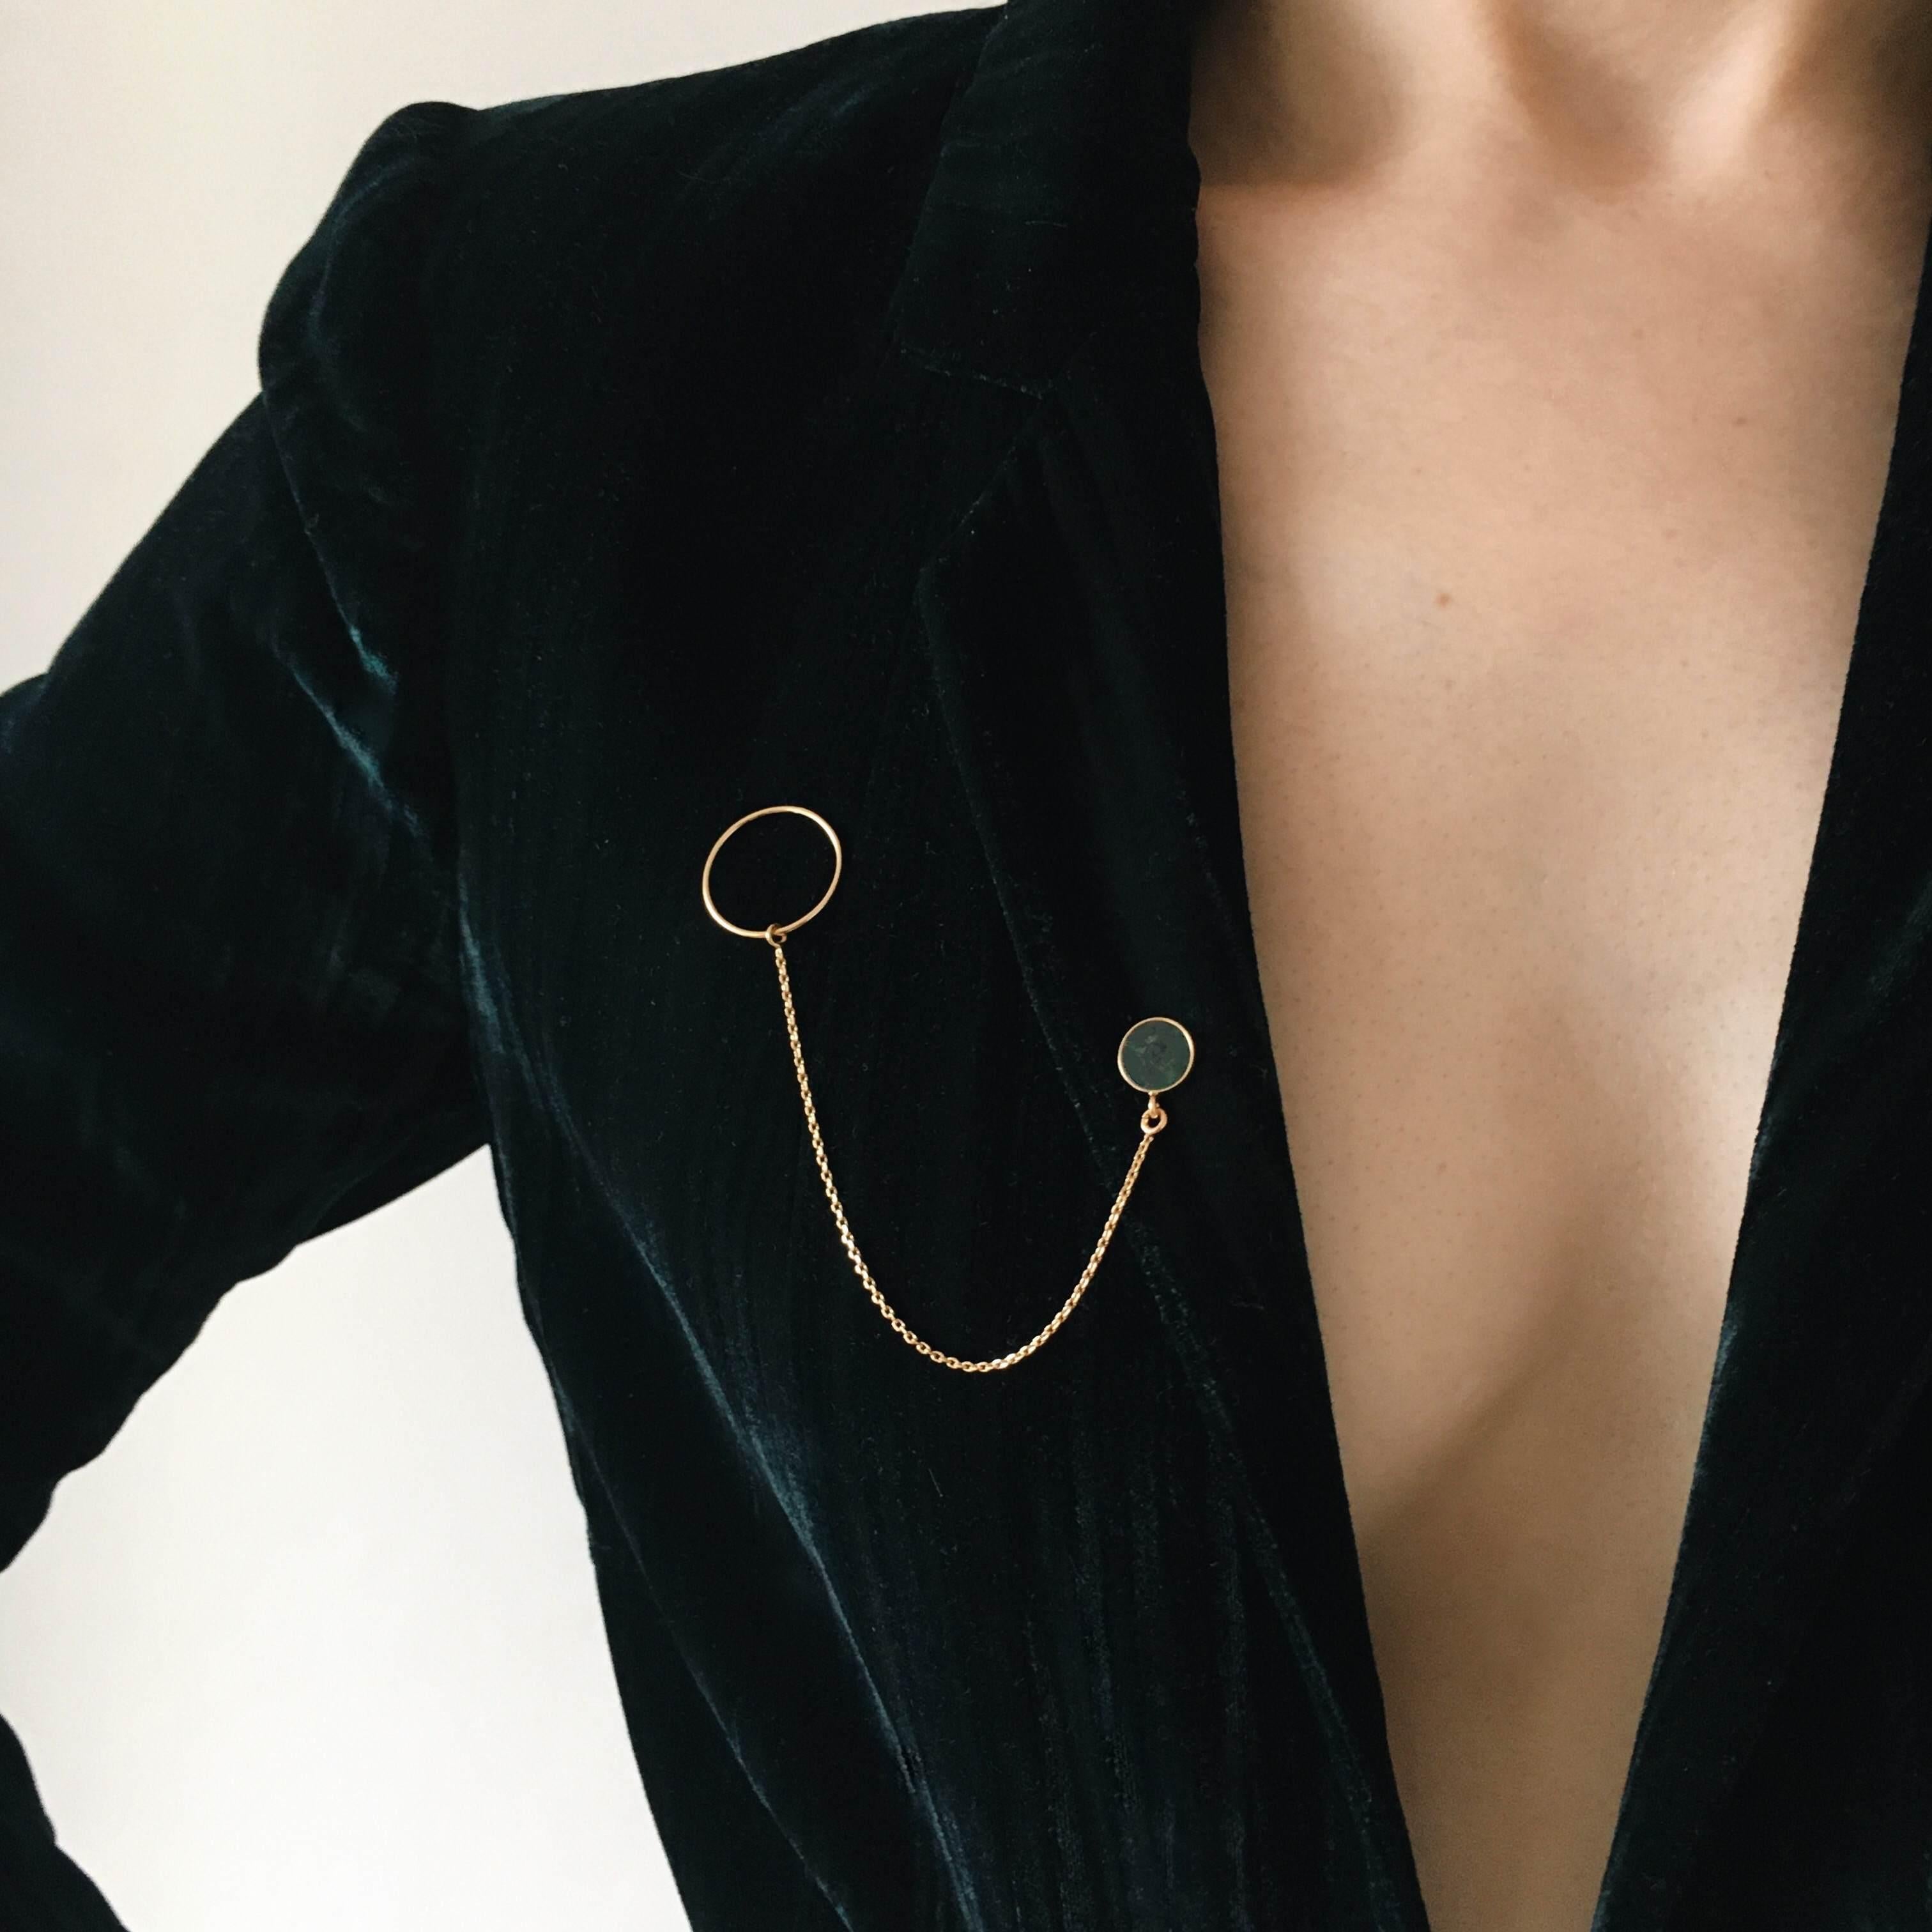 Gold brooch with stone, chain and circle will add a touch of extravagance to your styling. It looks beautiful attached to the lapel of a jacket or coat. If this is to be your first experience with this type of jewellery, this model will be perfect.